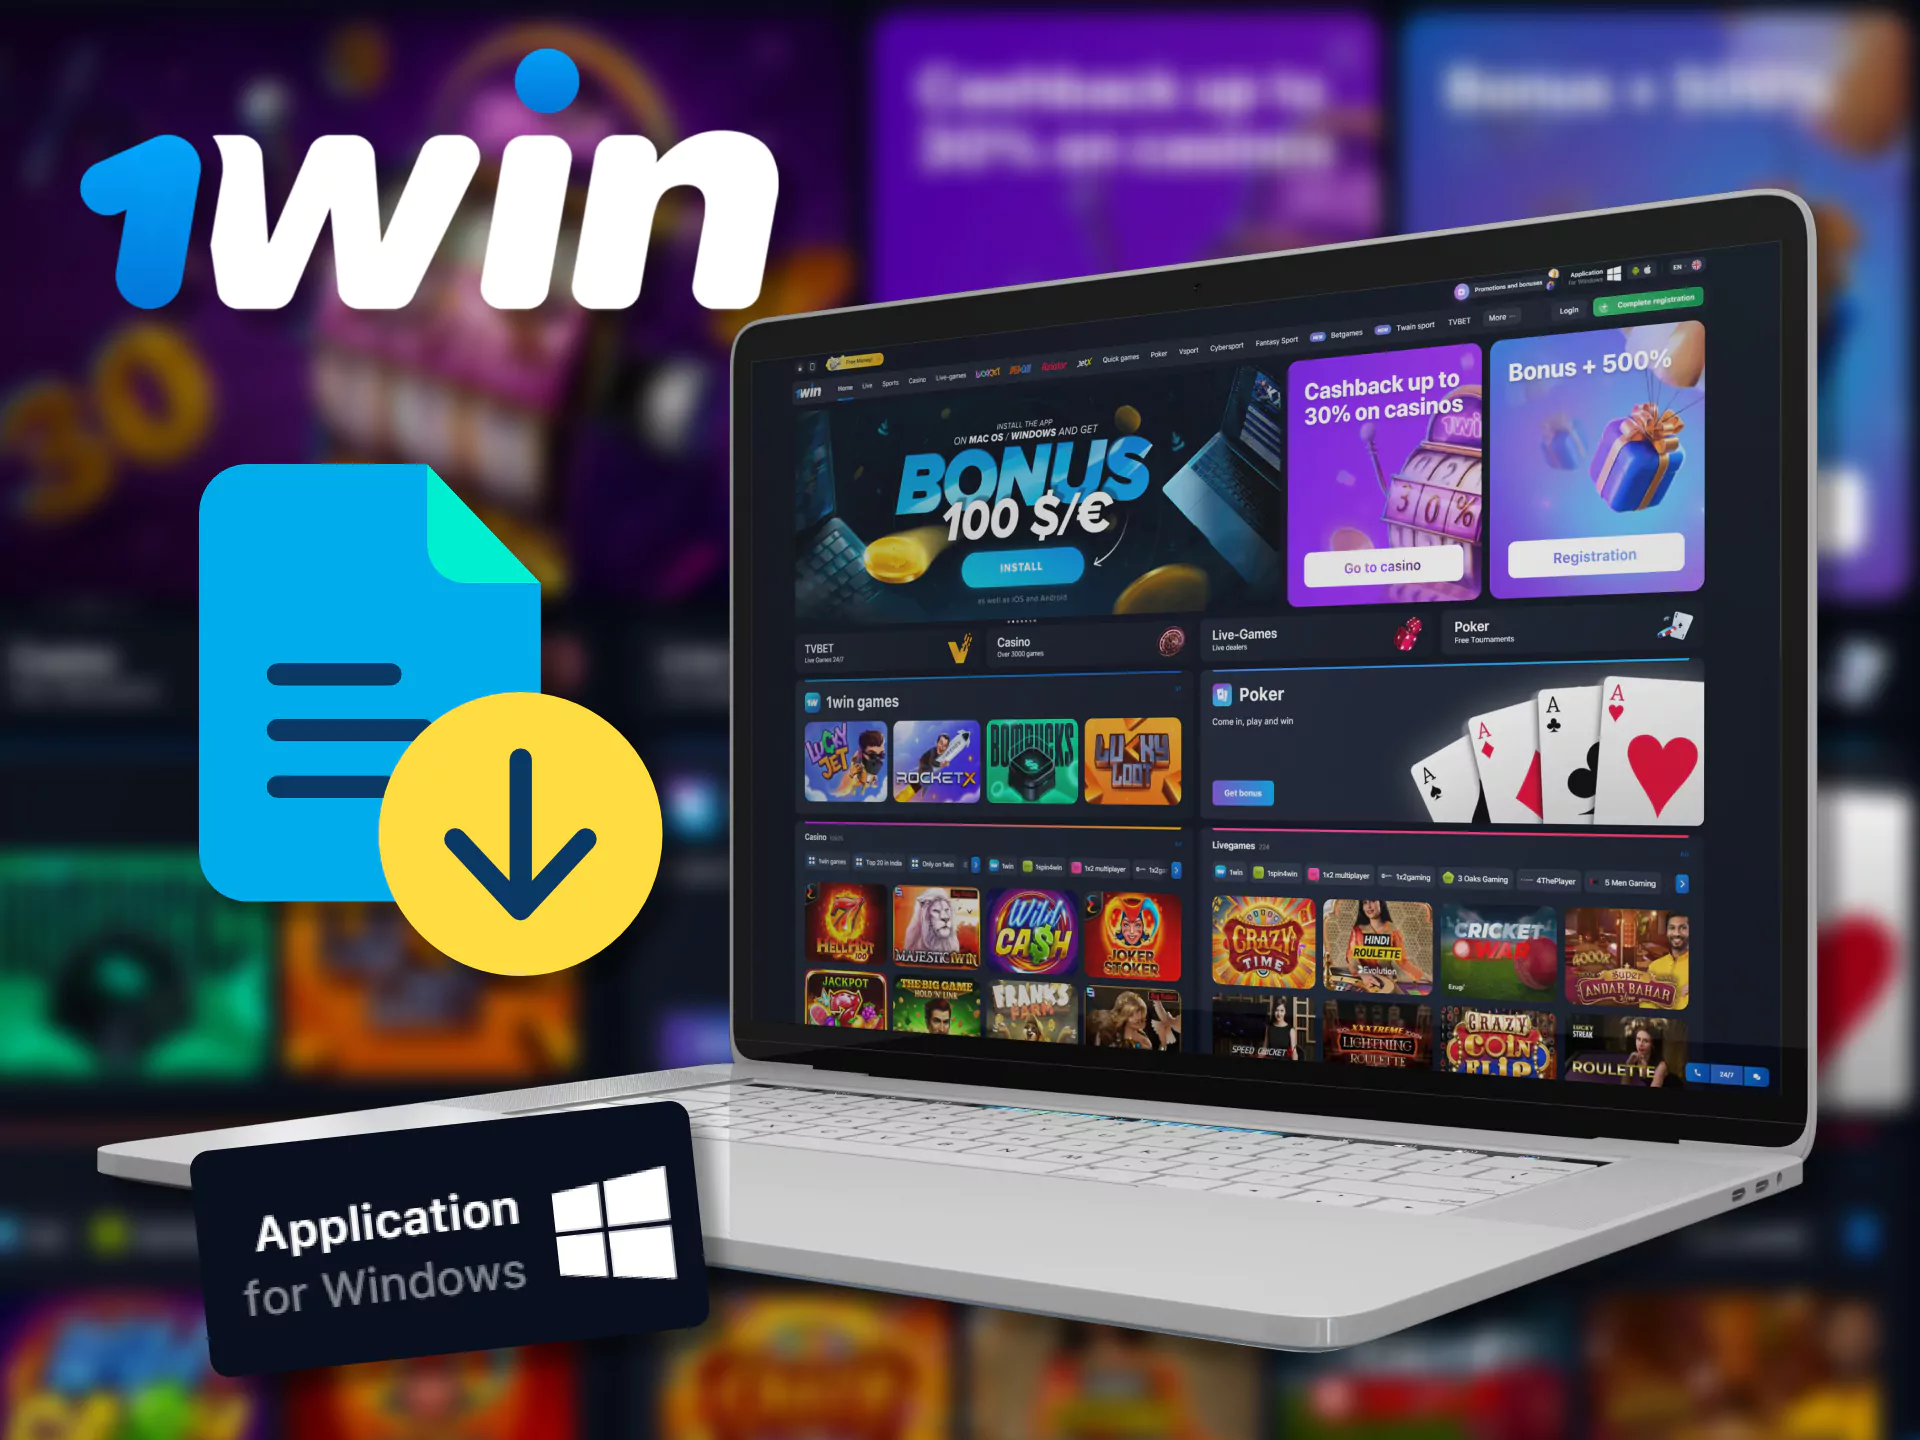 On 1Win, download a special application for your computer.